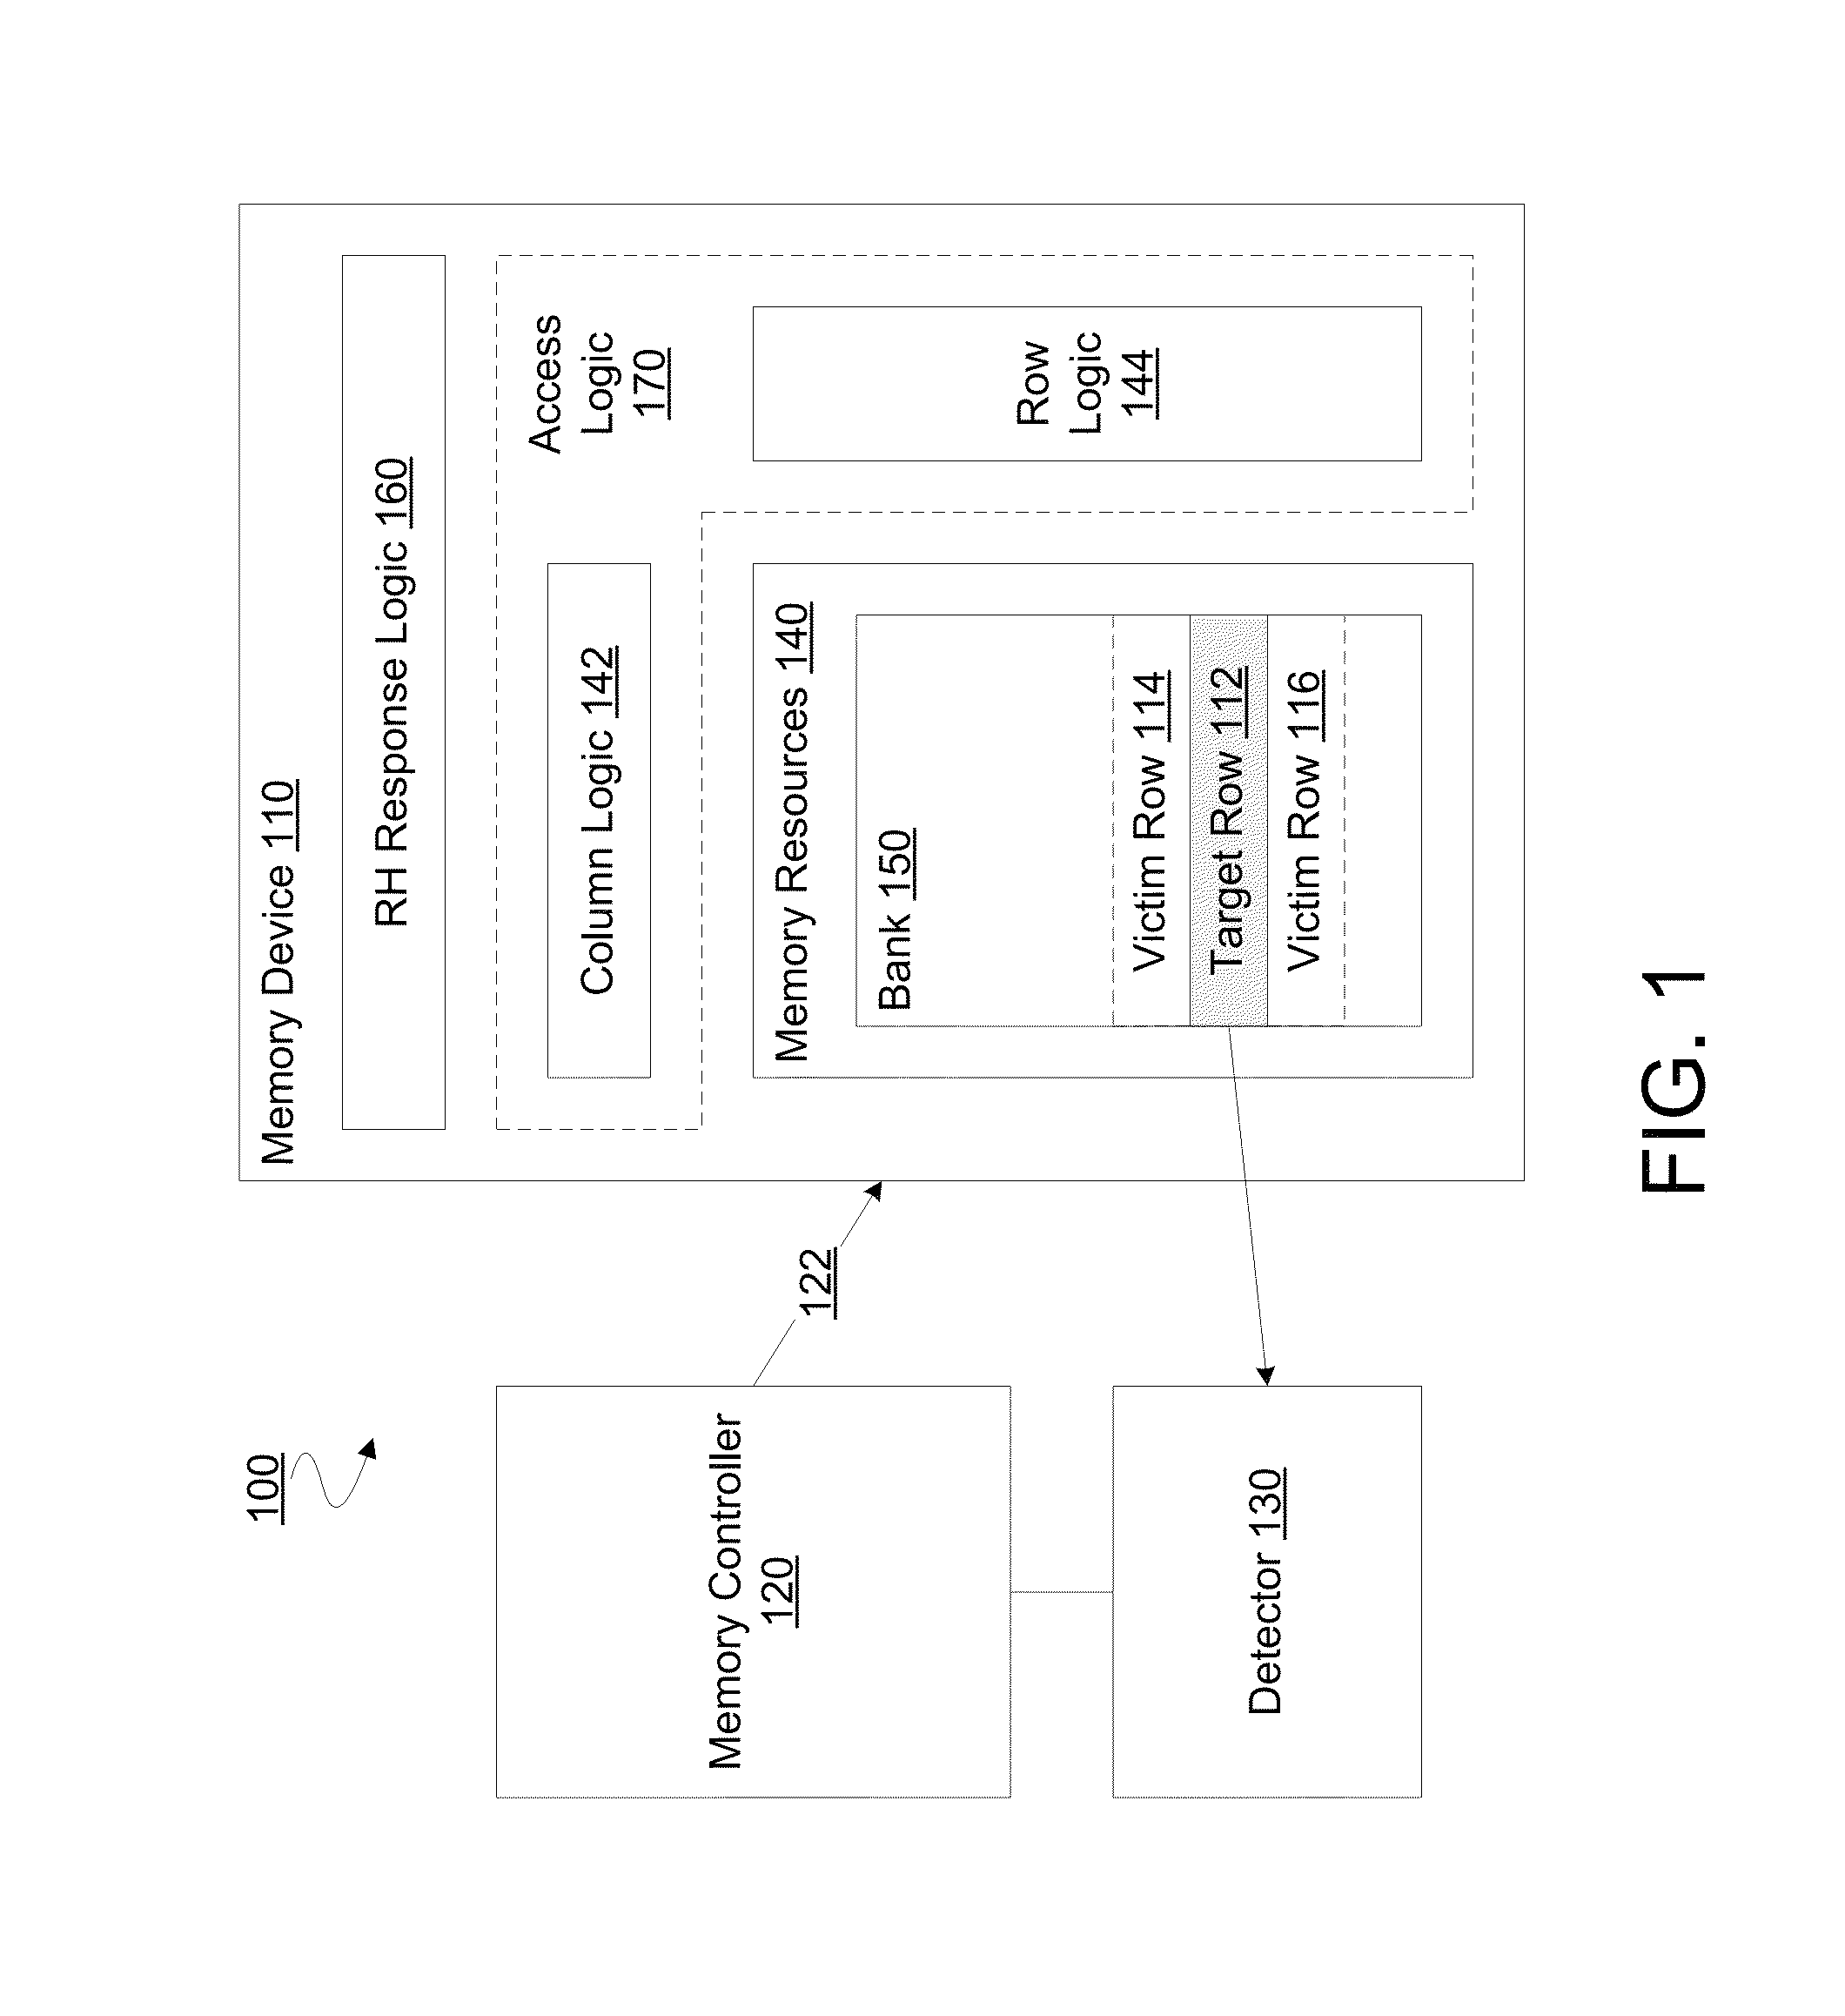 Method, apparatus and system for responding to a row hammer event